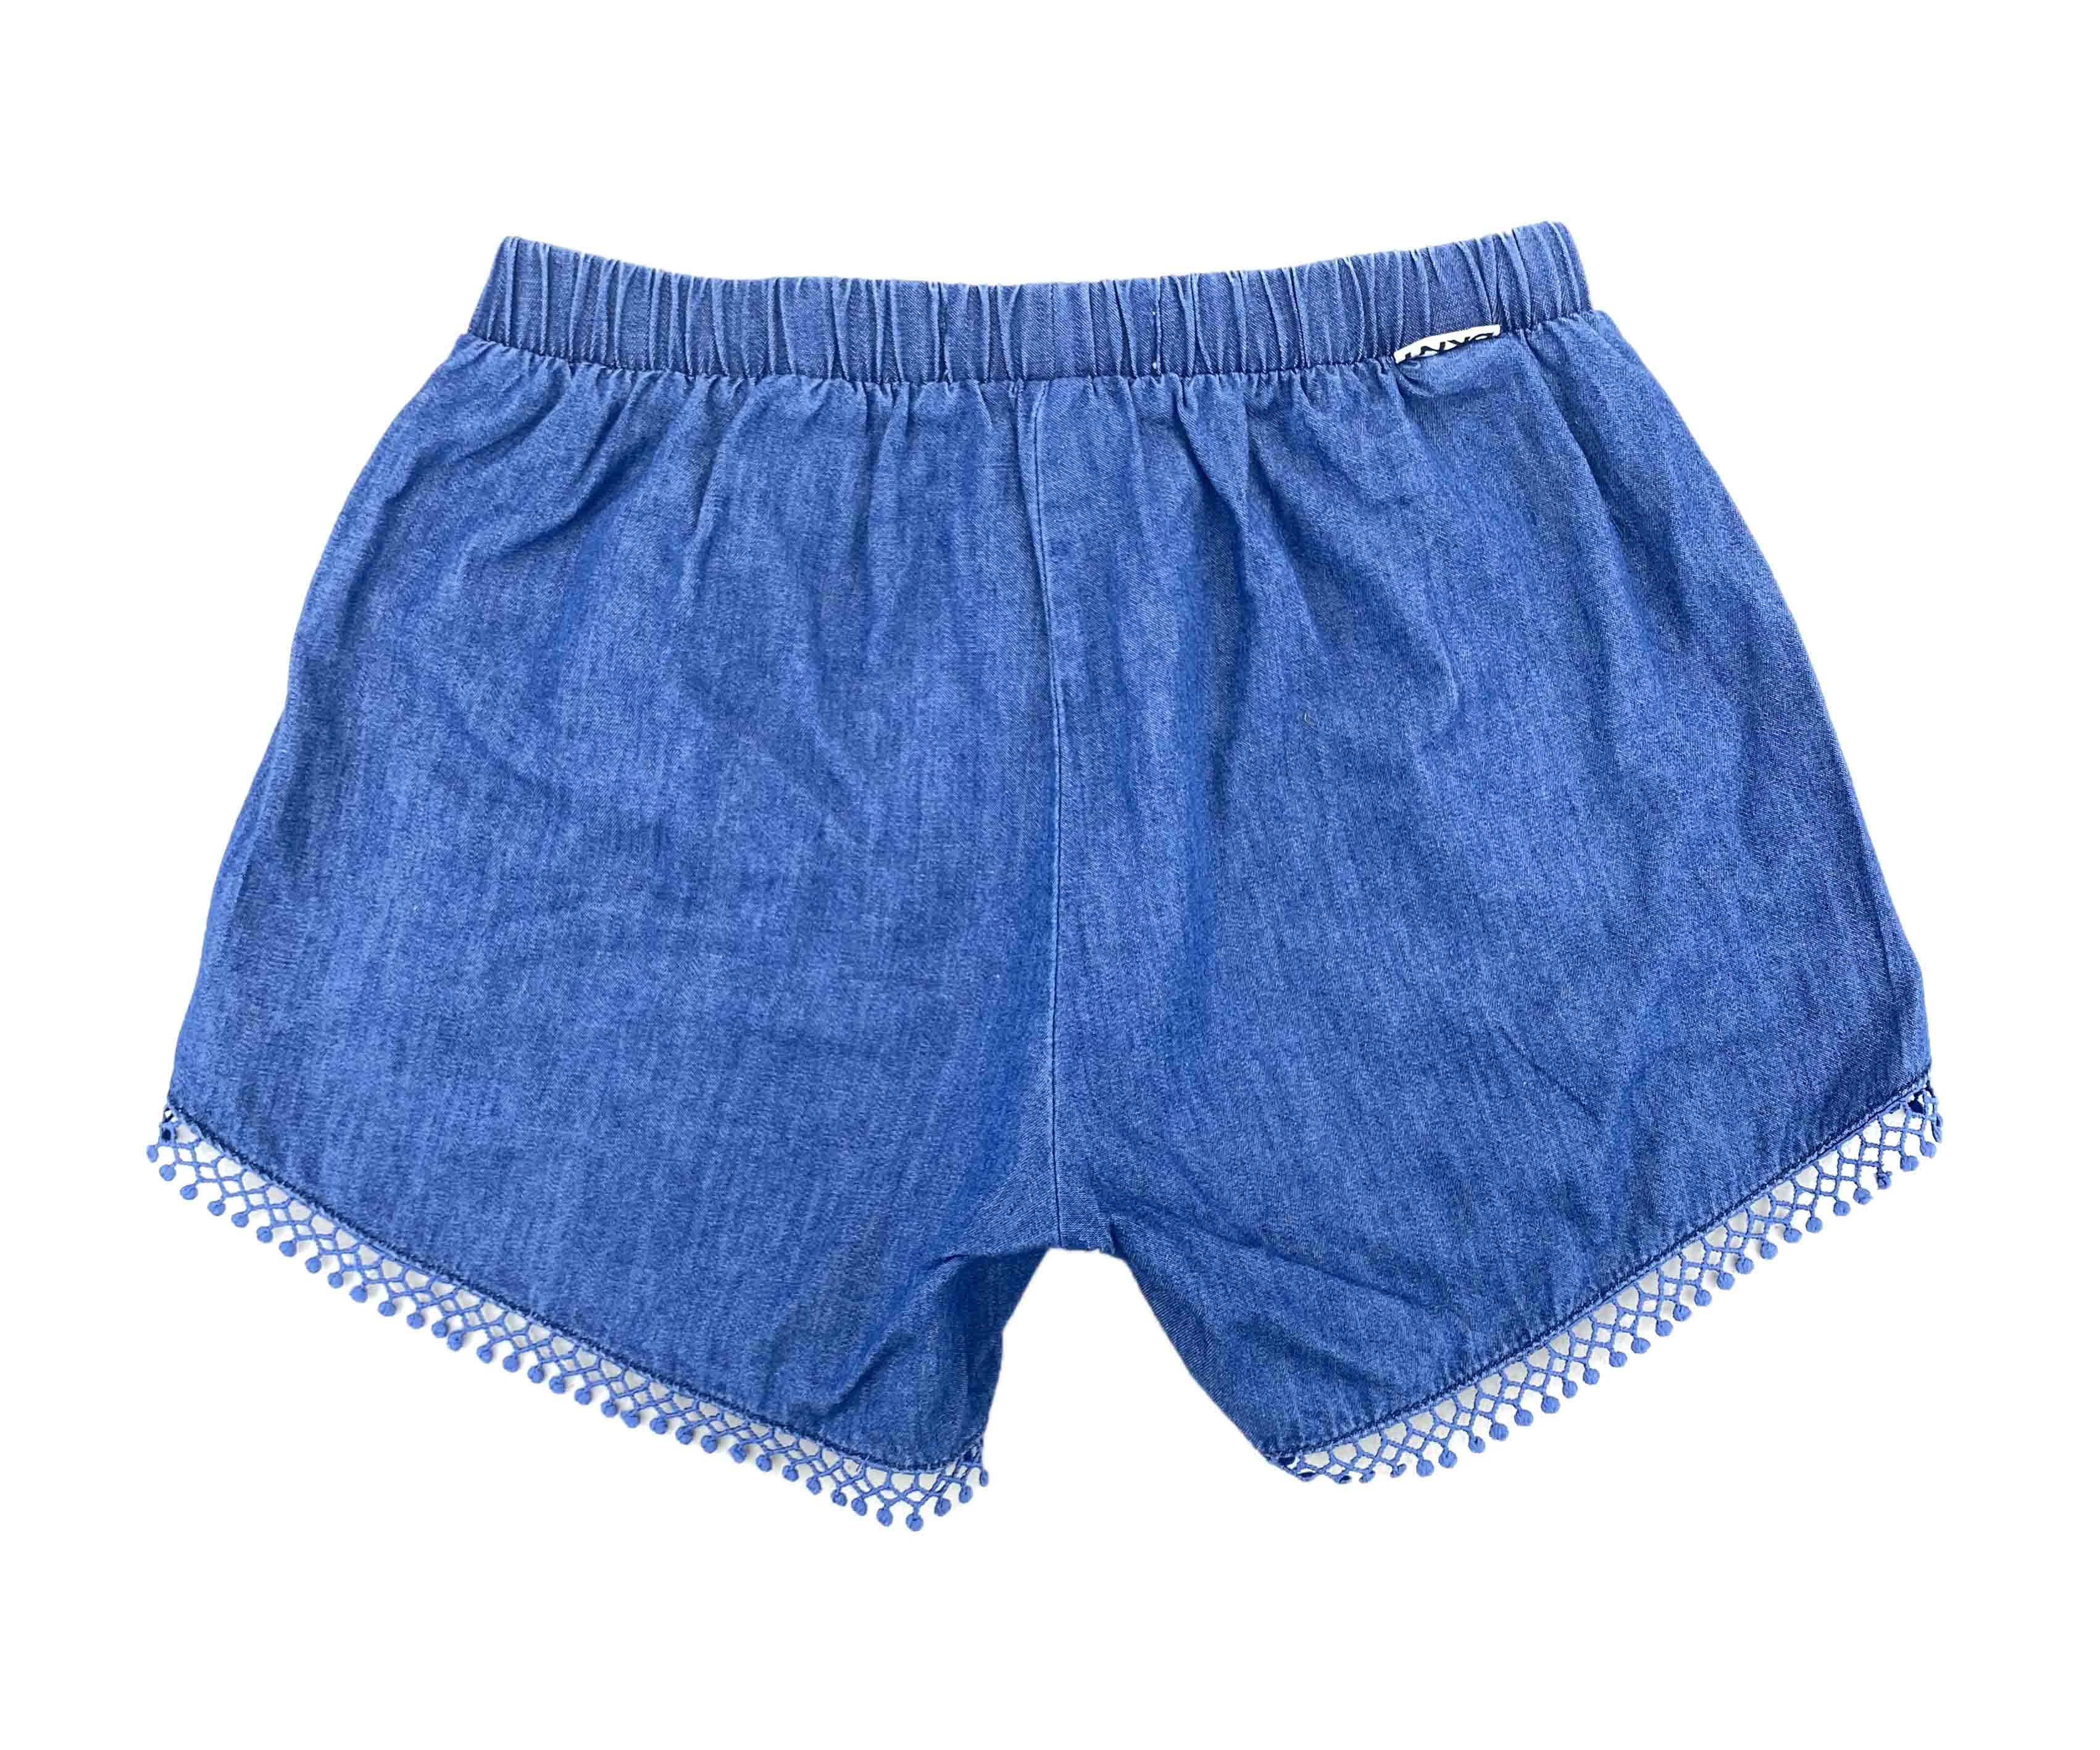 DKNY Girls Lace Shorts 2 Pack